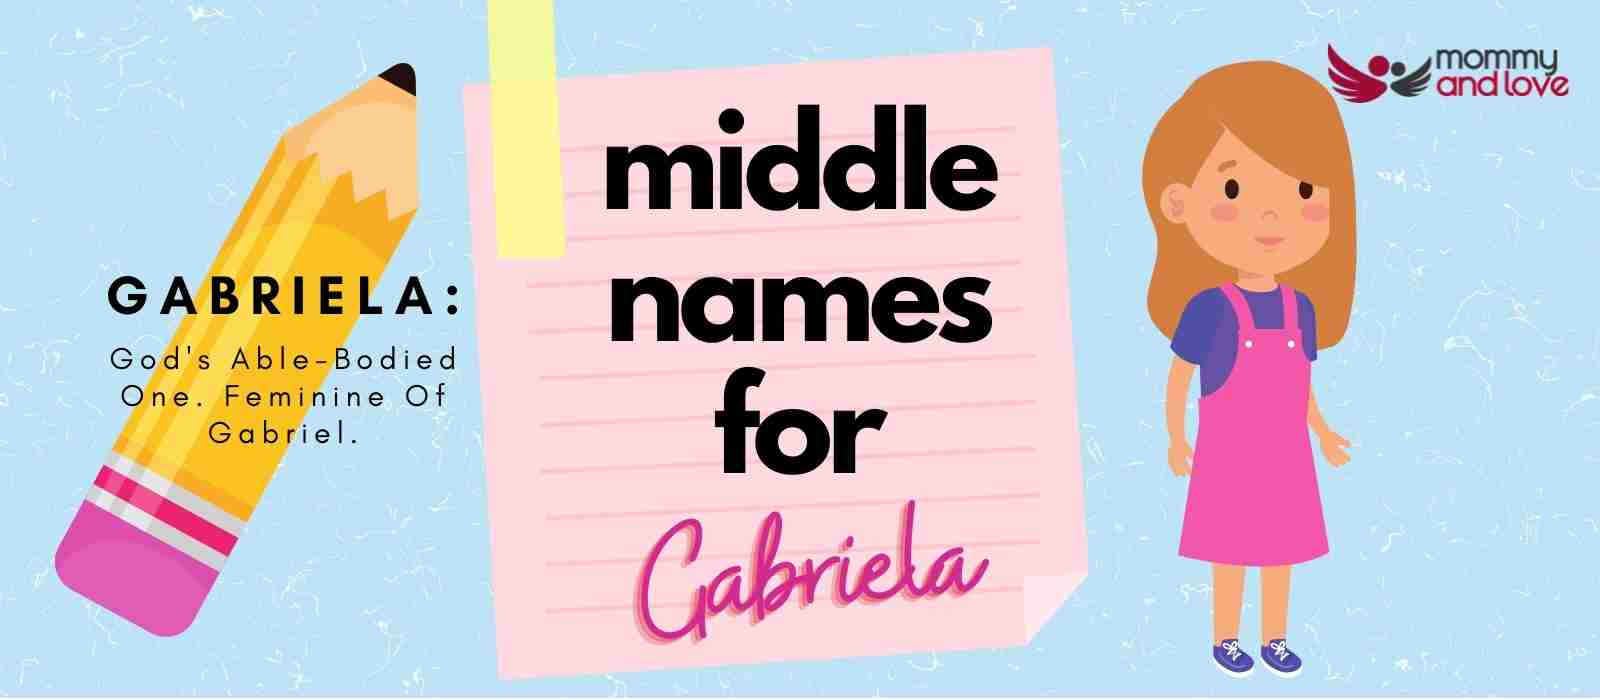 Middle Names for Gabriela